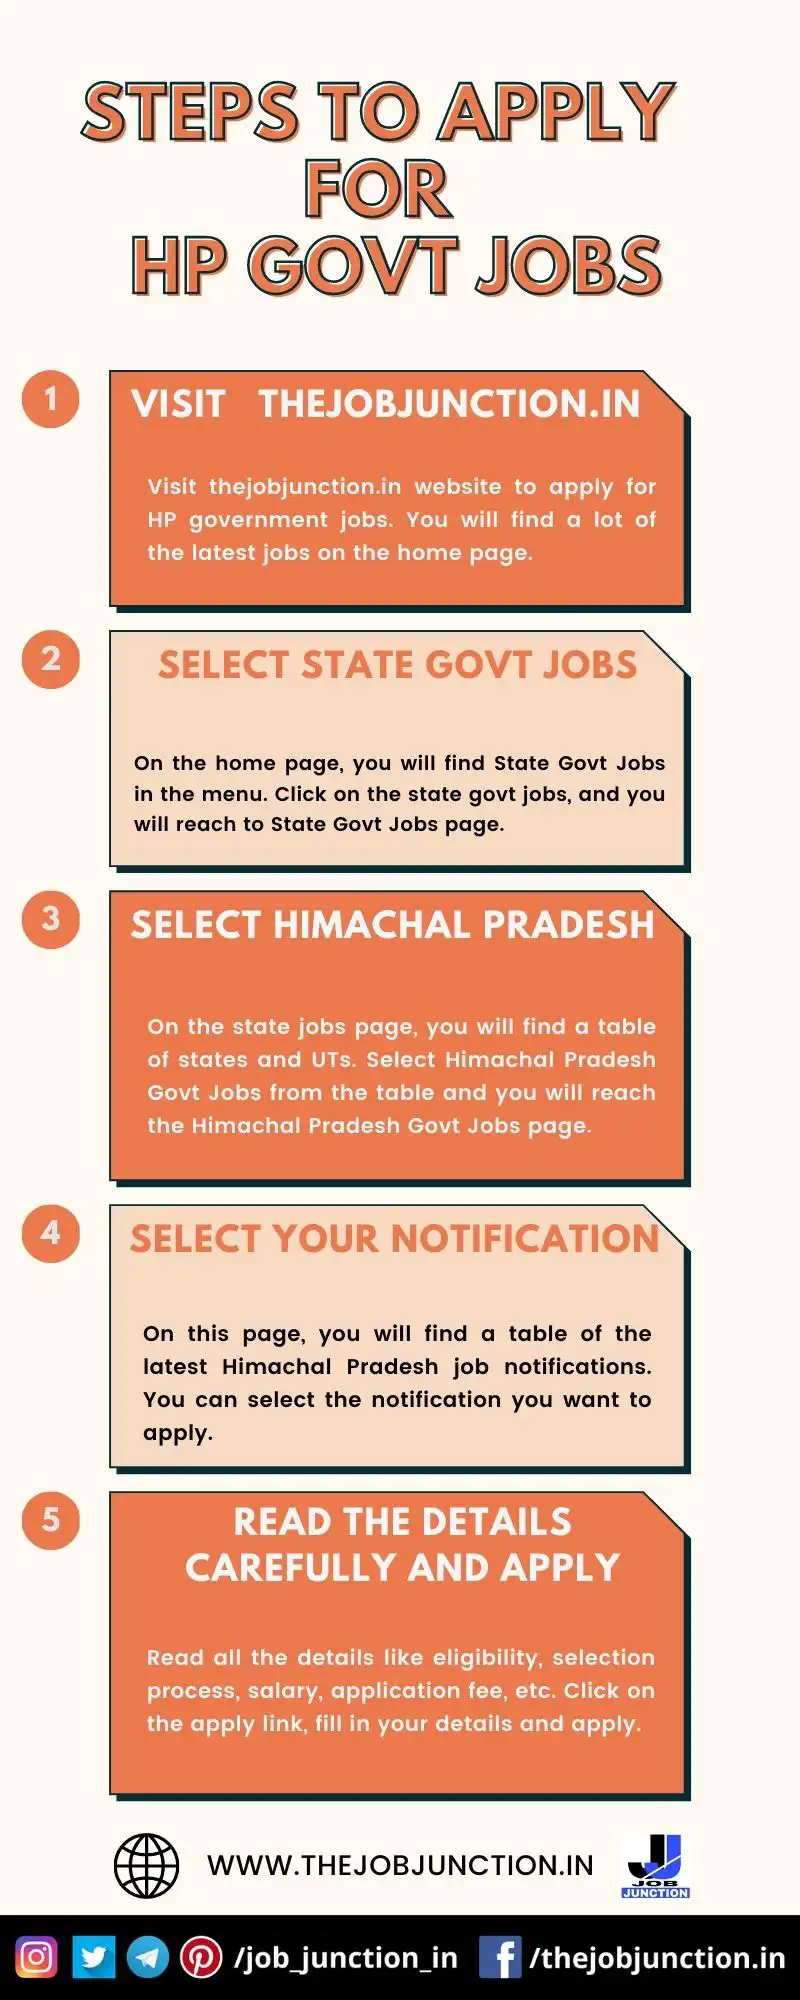 STEPS TO APPLY FOR HP GOVT JOBS